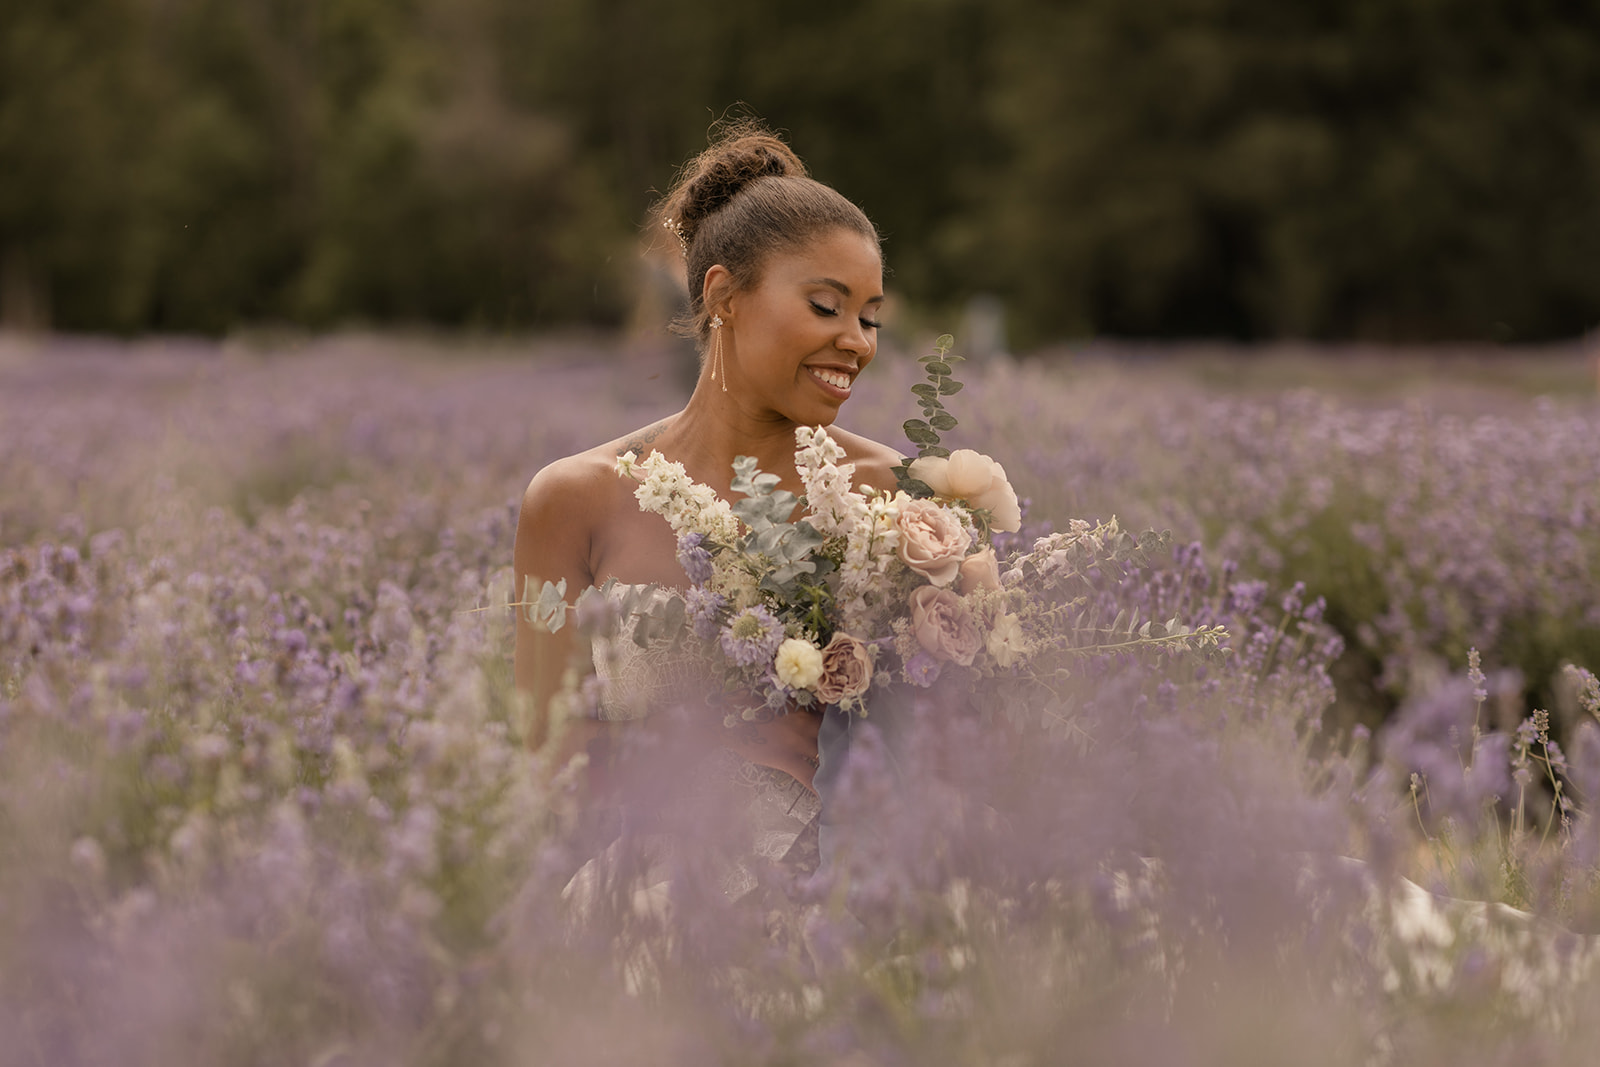 Bride in lavender field wedding with romantic and natural bridal bouquet | Kerstin Hahn Photography